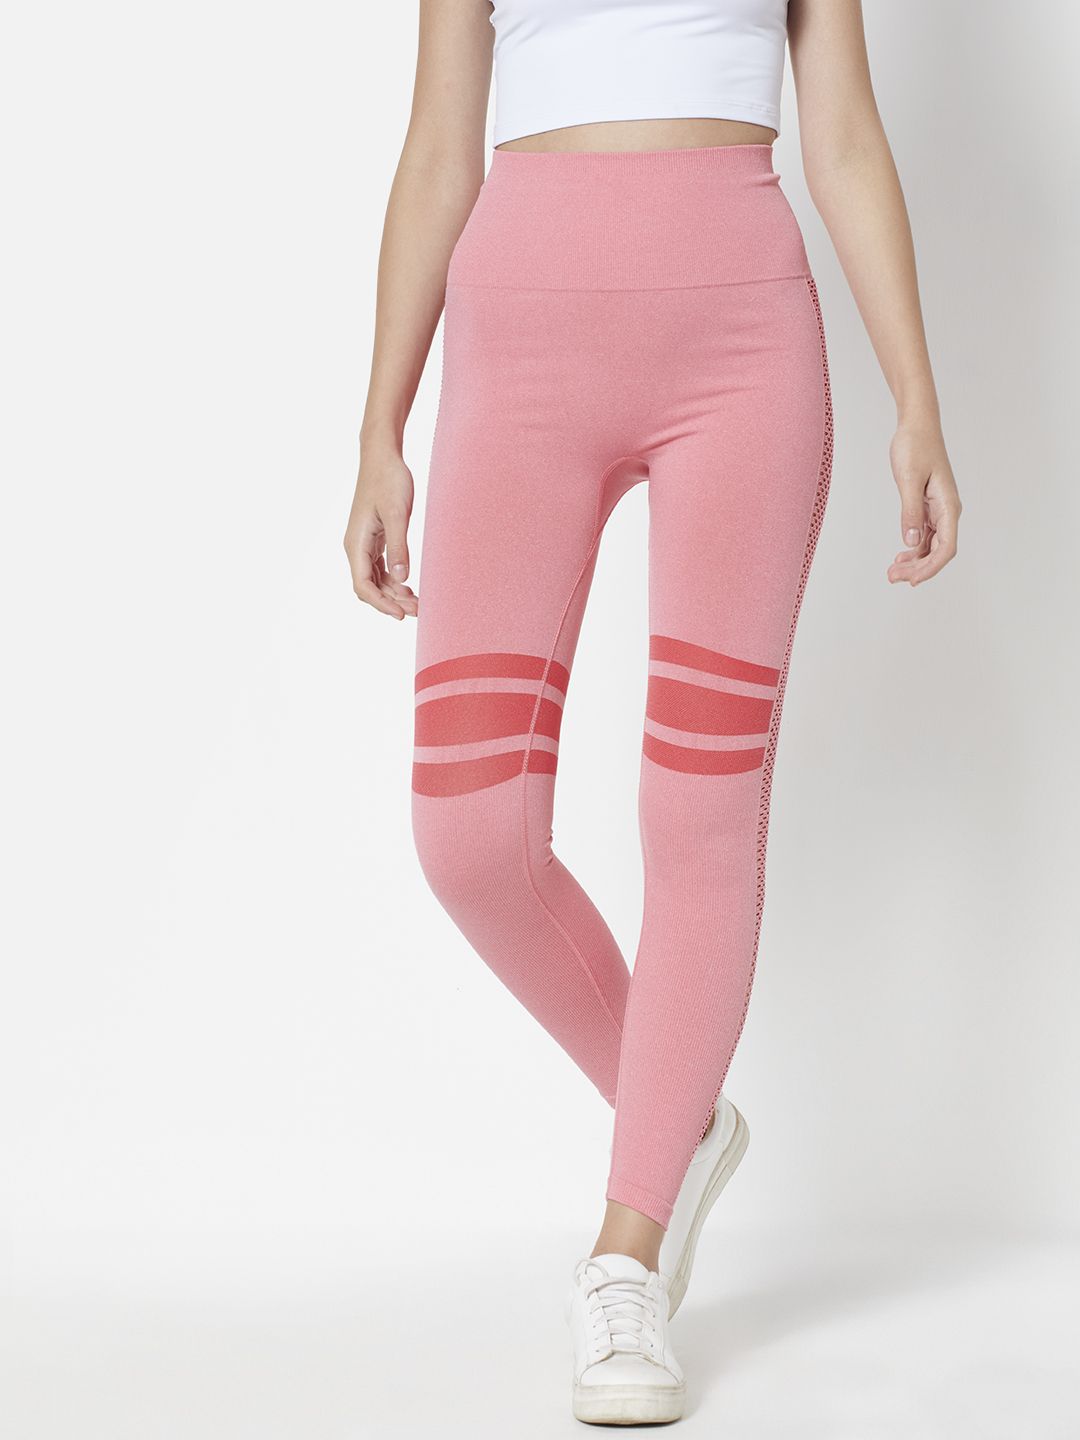 URBANIC Women Pink Striped Cut Out Slim Fit Gym Tights Price in India